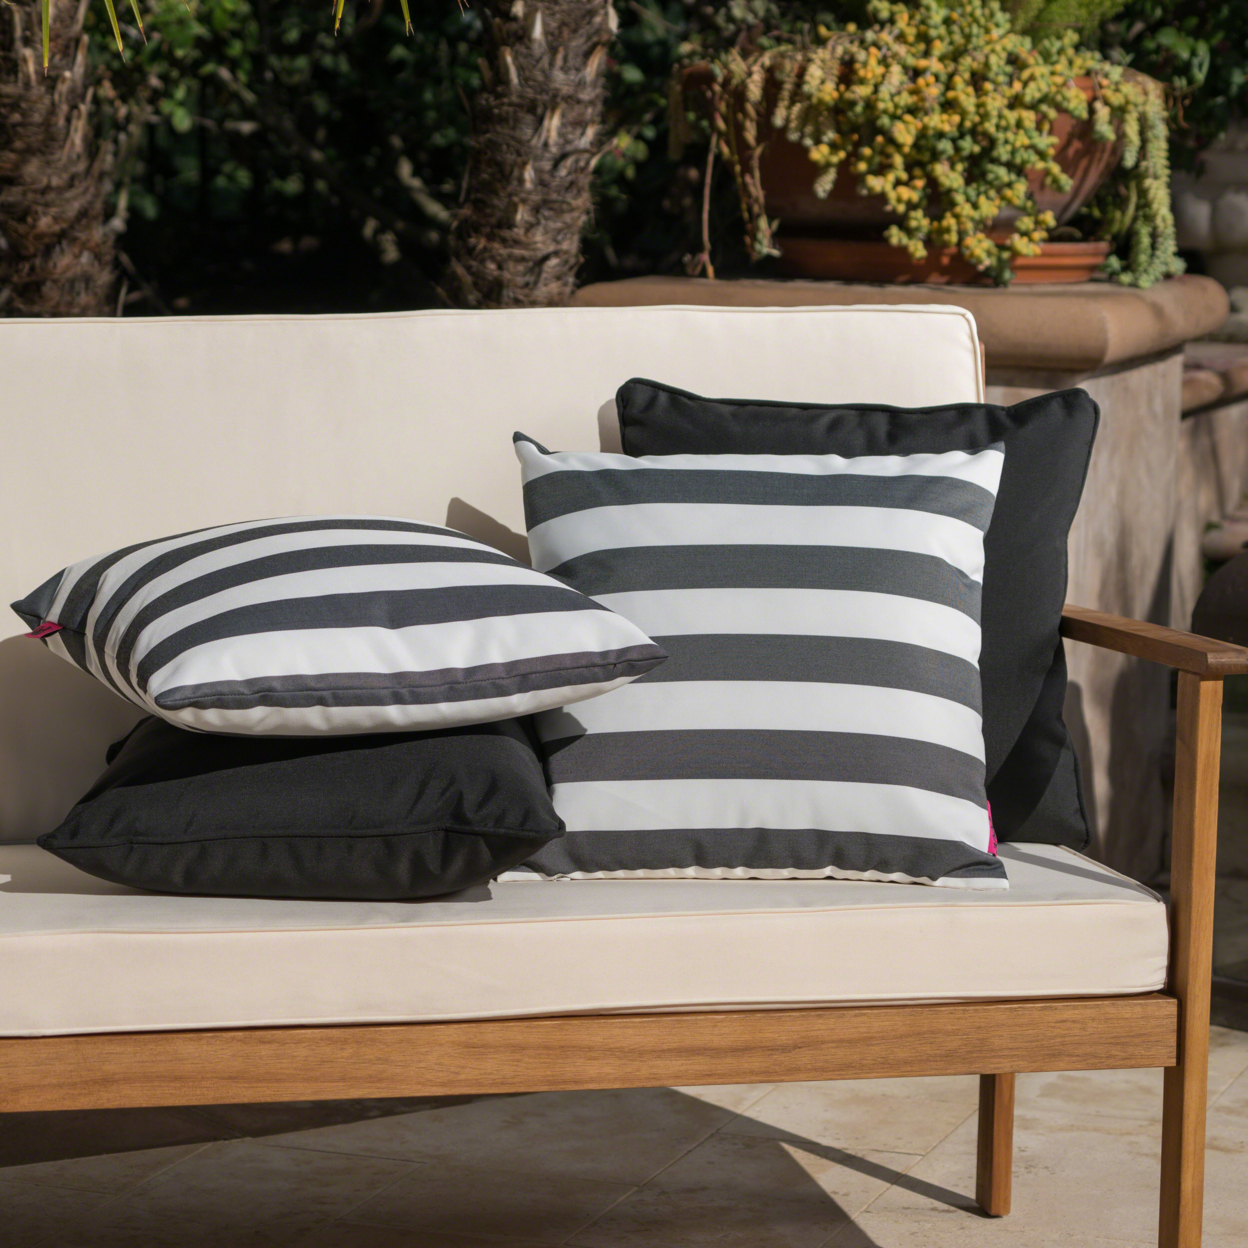 La Jolla Outdoor Striped Water Resistant Square Throw Pillows - Set Of 4 - Black/White - Zigzag